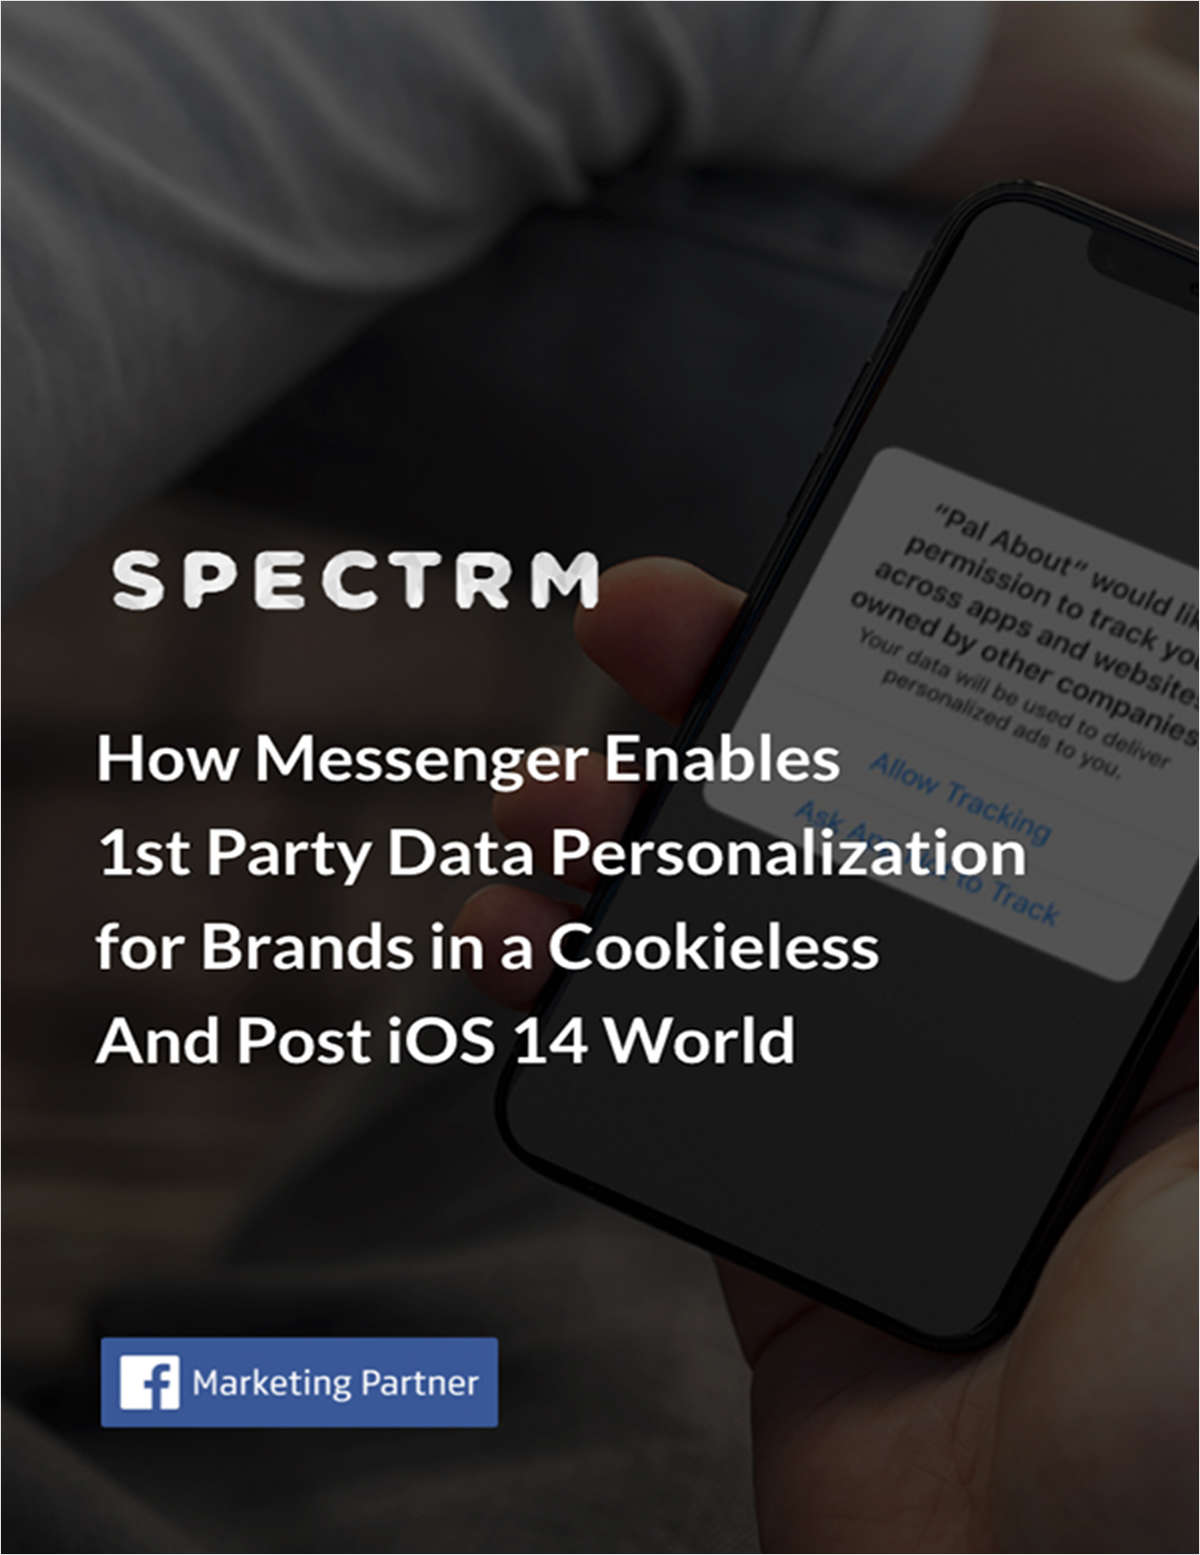 How Messenger Enables 1st Party Data Personalization for Brands in a Cookieless And Post iOS 14 World